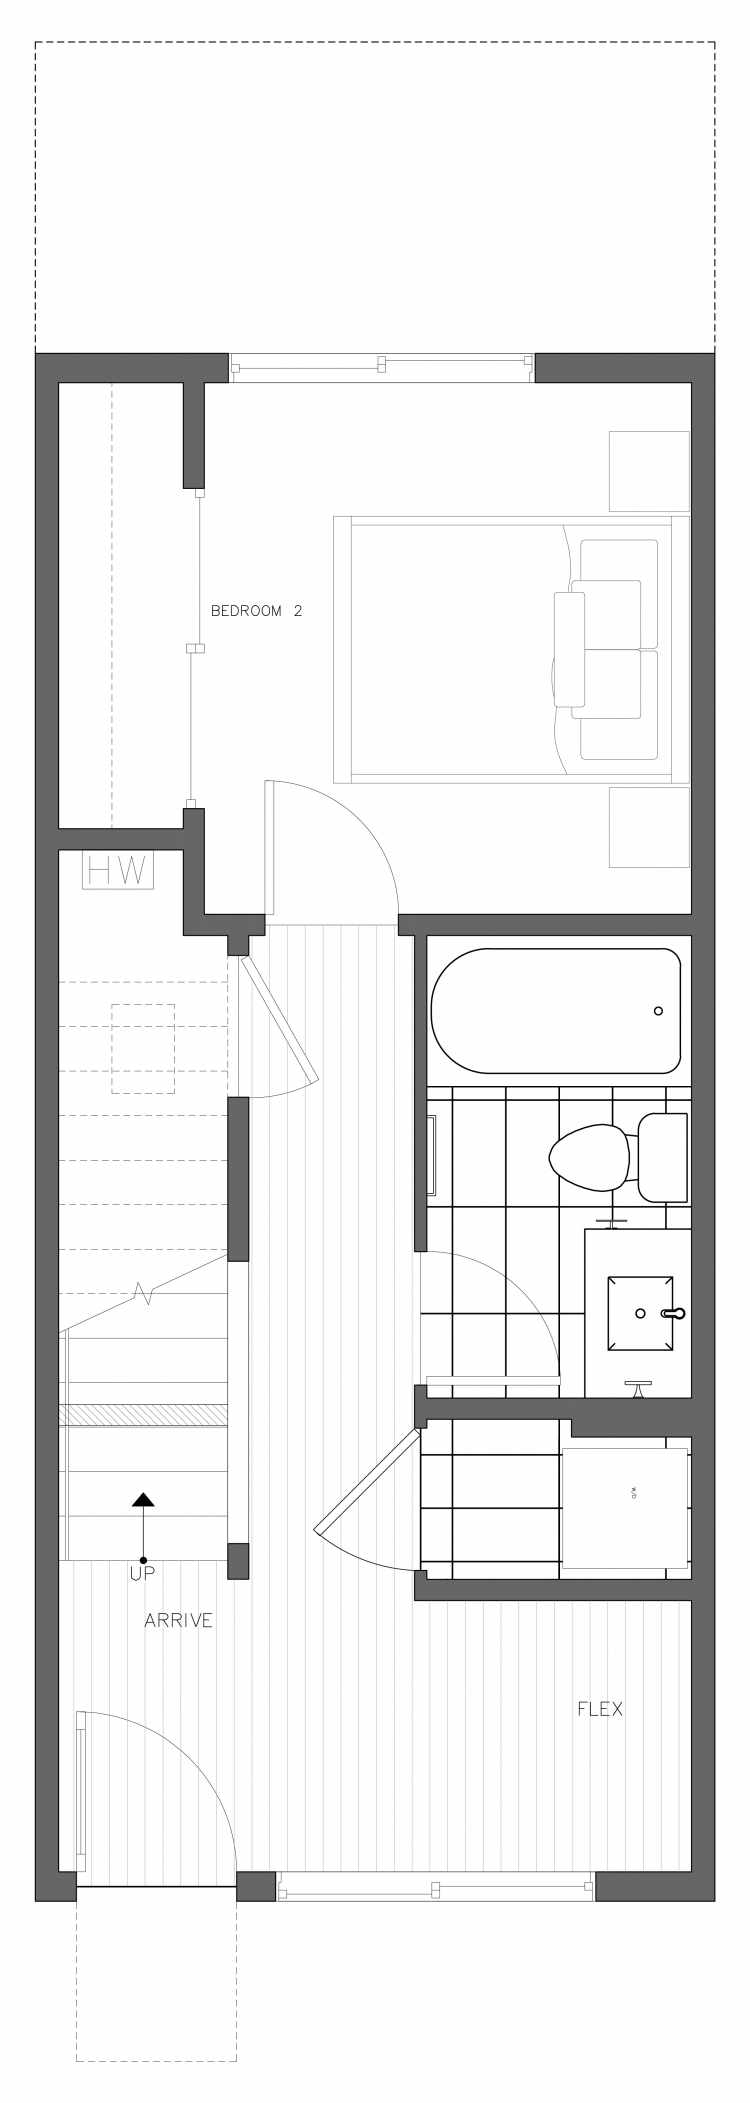 First Floor Plan of 3418B 15th Ave W, One of the Arlo Townhomes in North Queen Anne